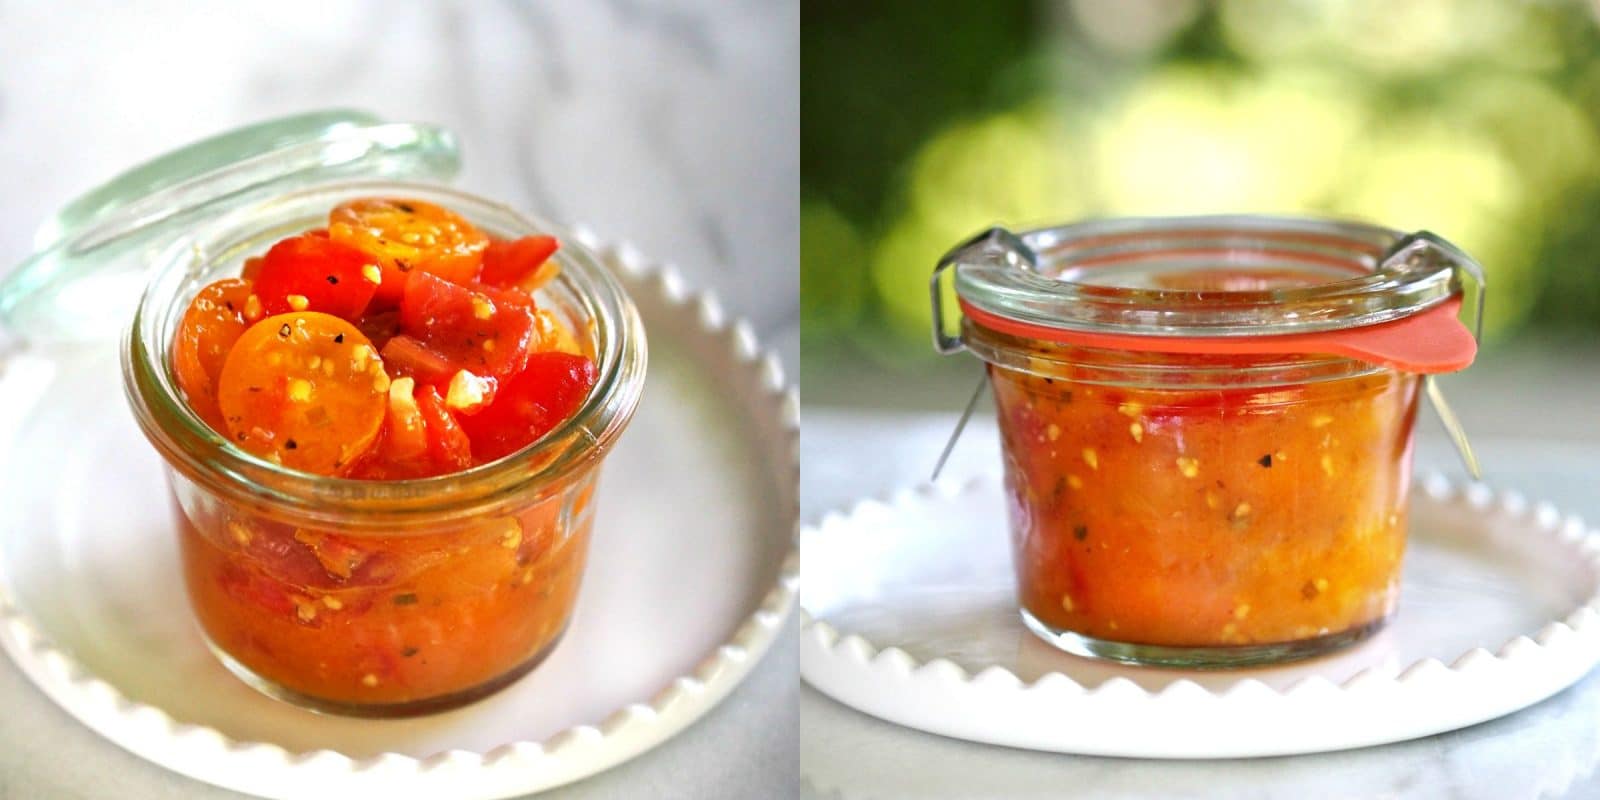 Chunky Cherry Tomato Vinaigrette - fresh tomatoes, oil, wine vinegar, shallots, olive oil, salt & pepper. Simple in its deliciousness & deliciously simple. Simply Sated